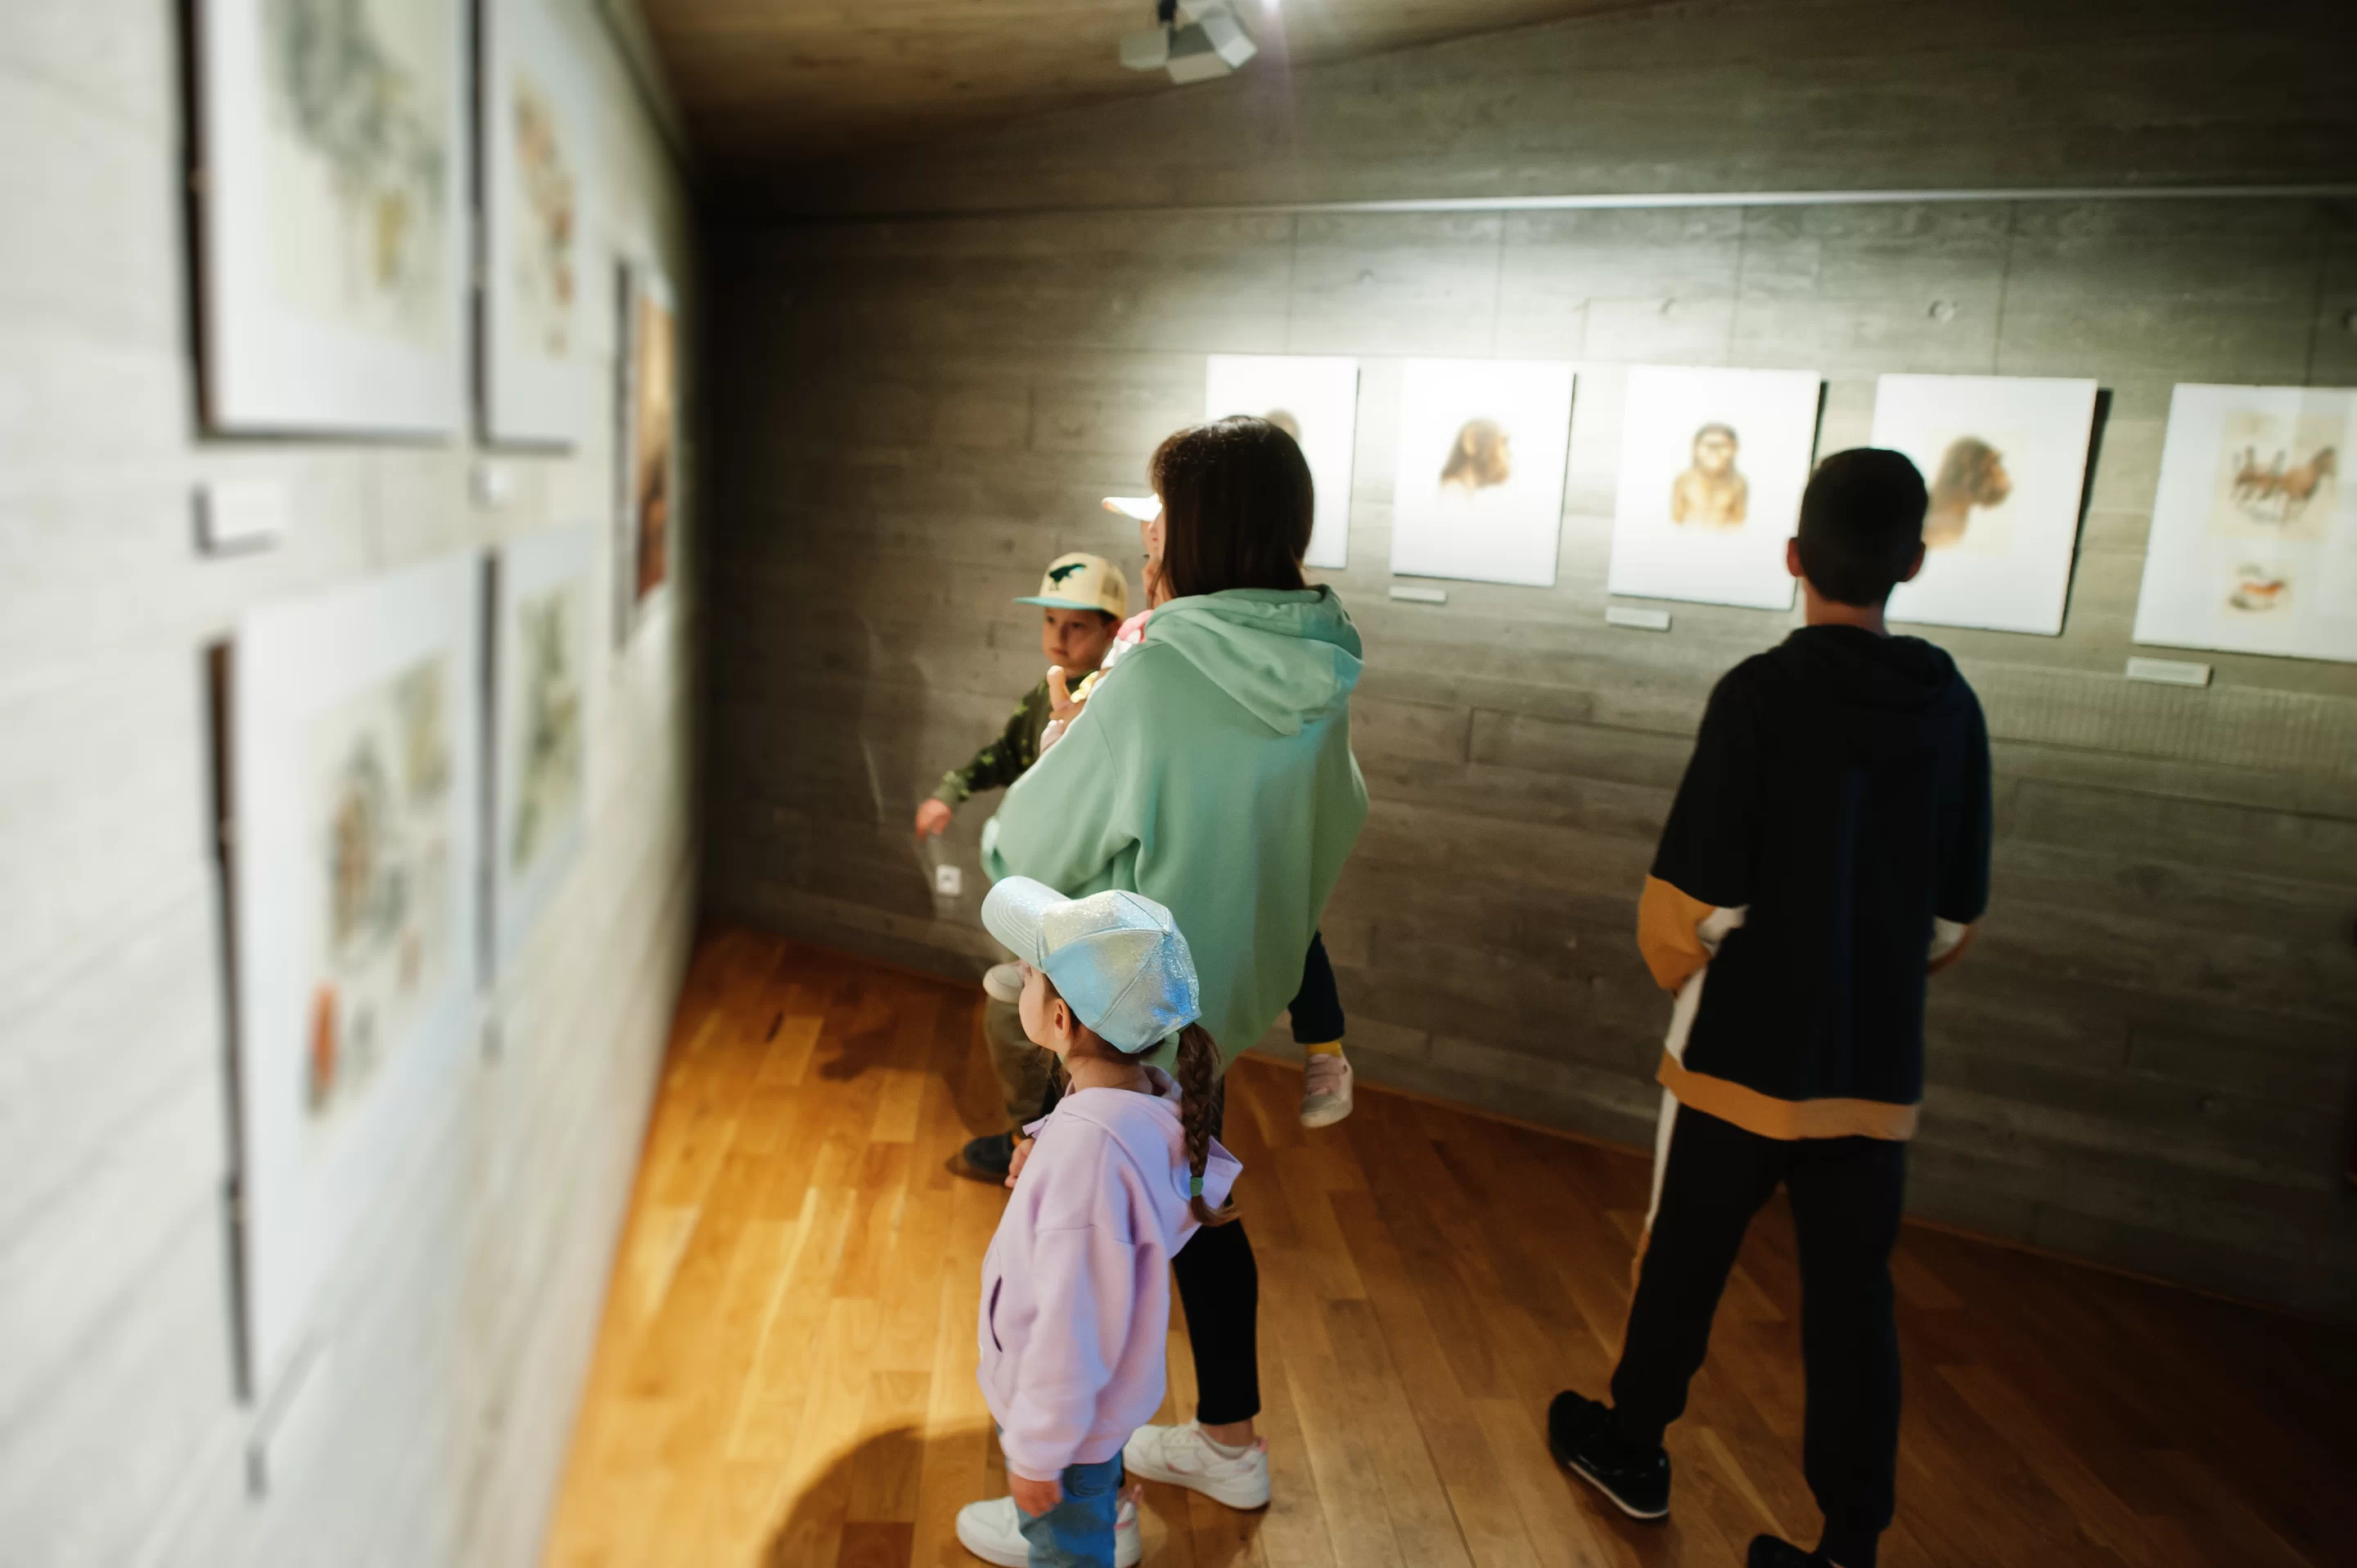 Explore the San José Children's museum: the first interactive museum in Central America!